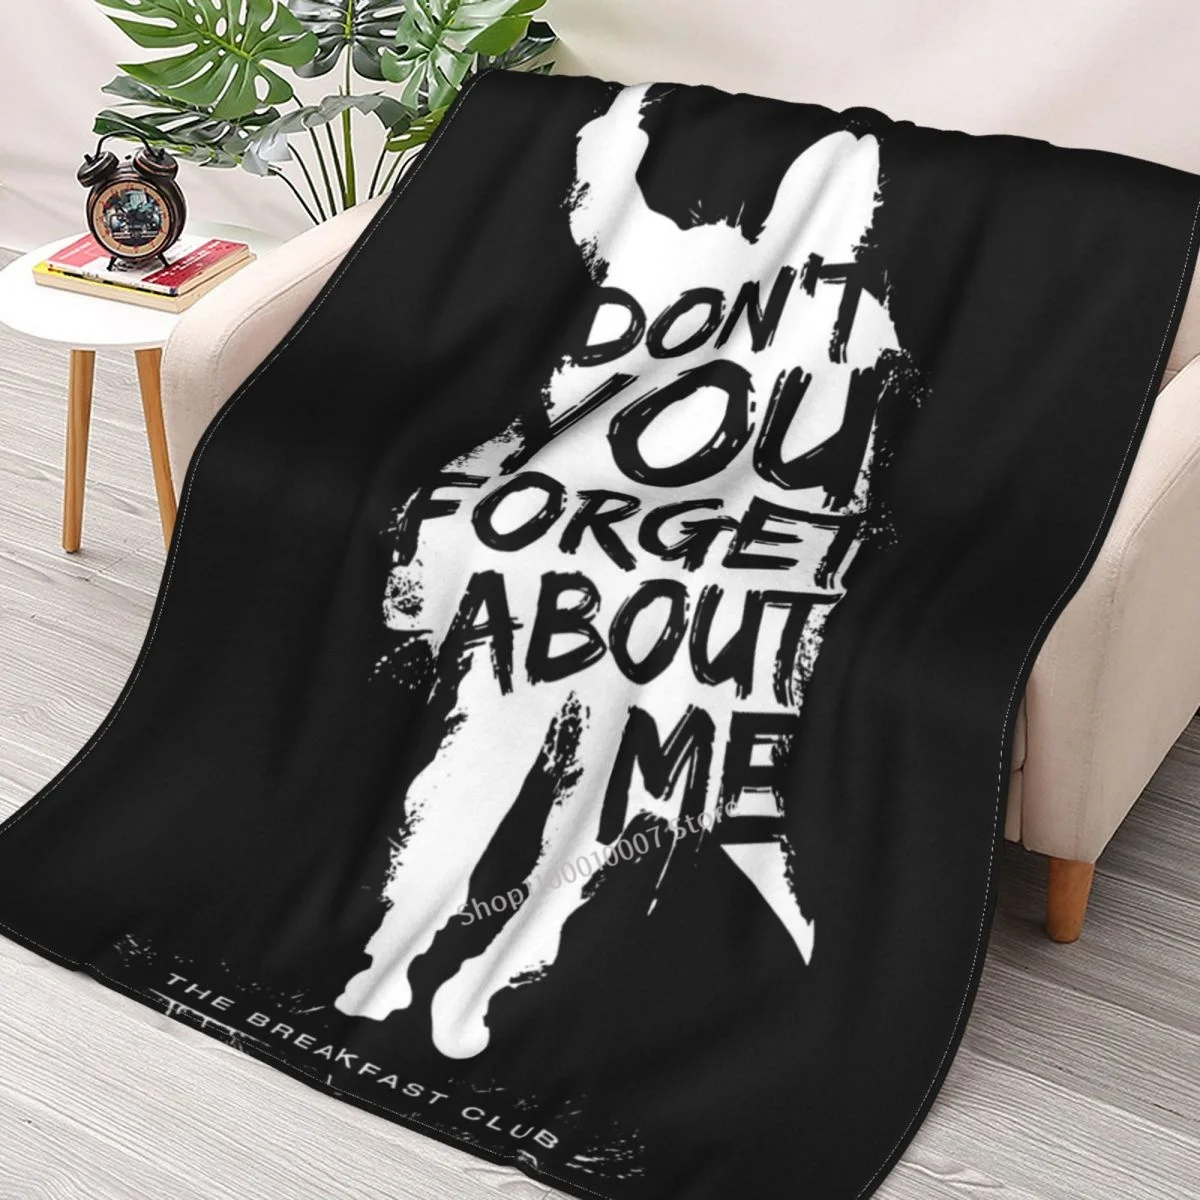 

Breakfast Club Dont You Forget About Me Text Throw Blanket 3D printed sofa bedroom decorative blanket children adult Christmas